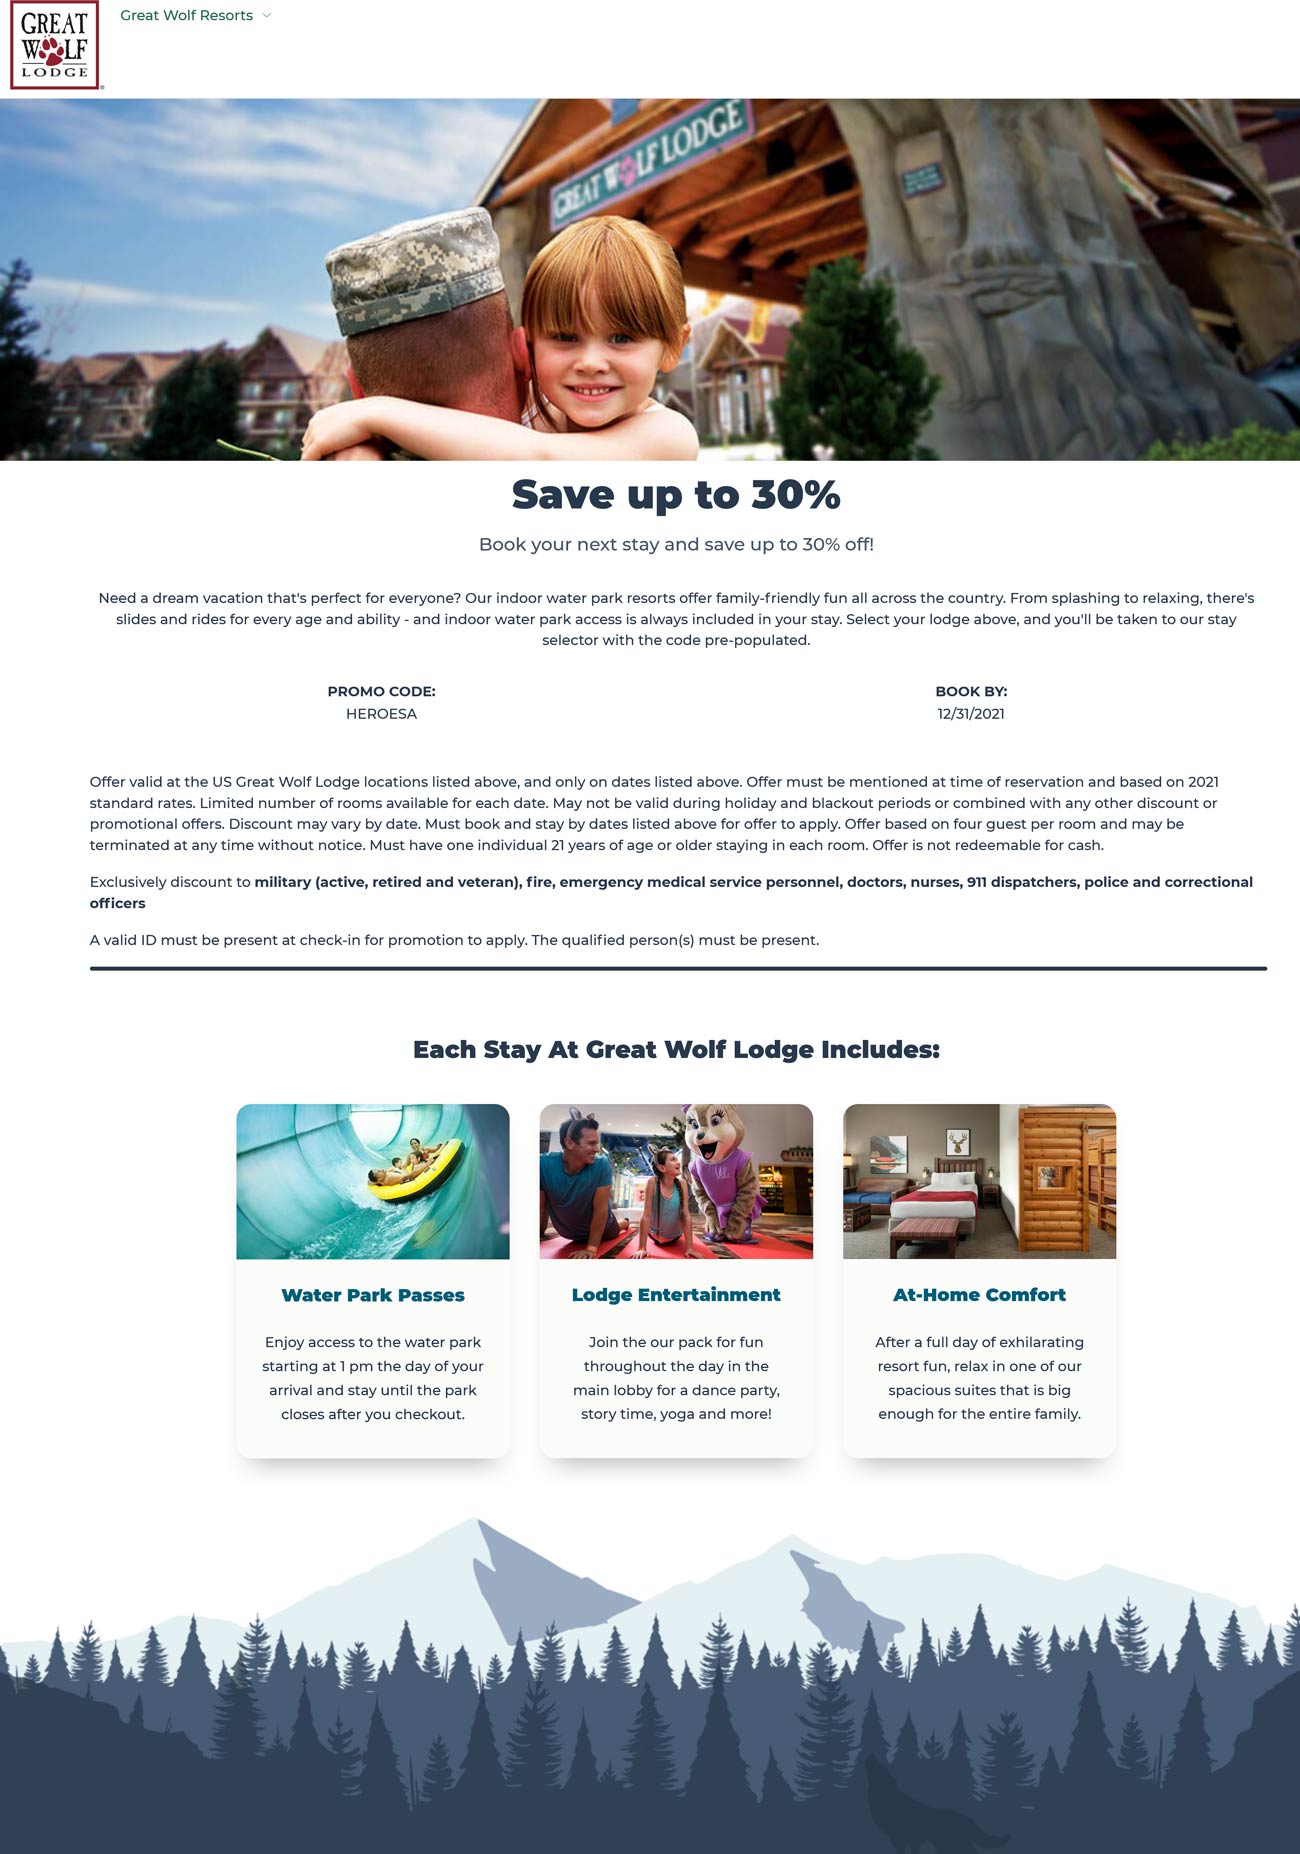 Great Wolf Lodge stores Coupon  Medical, military, first responders enjoy 30% off at Great Wolf Lodge indoor waterpark locations via promo code HEROESA #greatwolflodge 